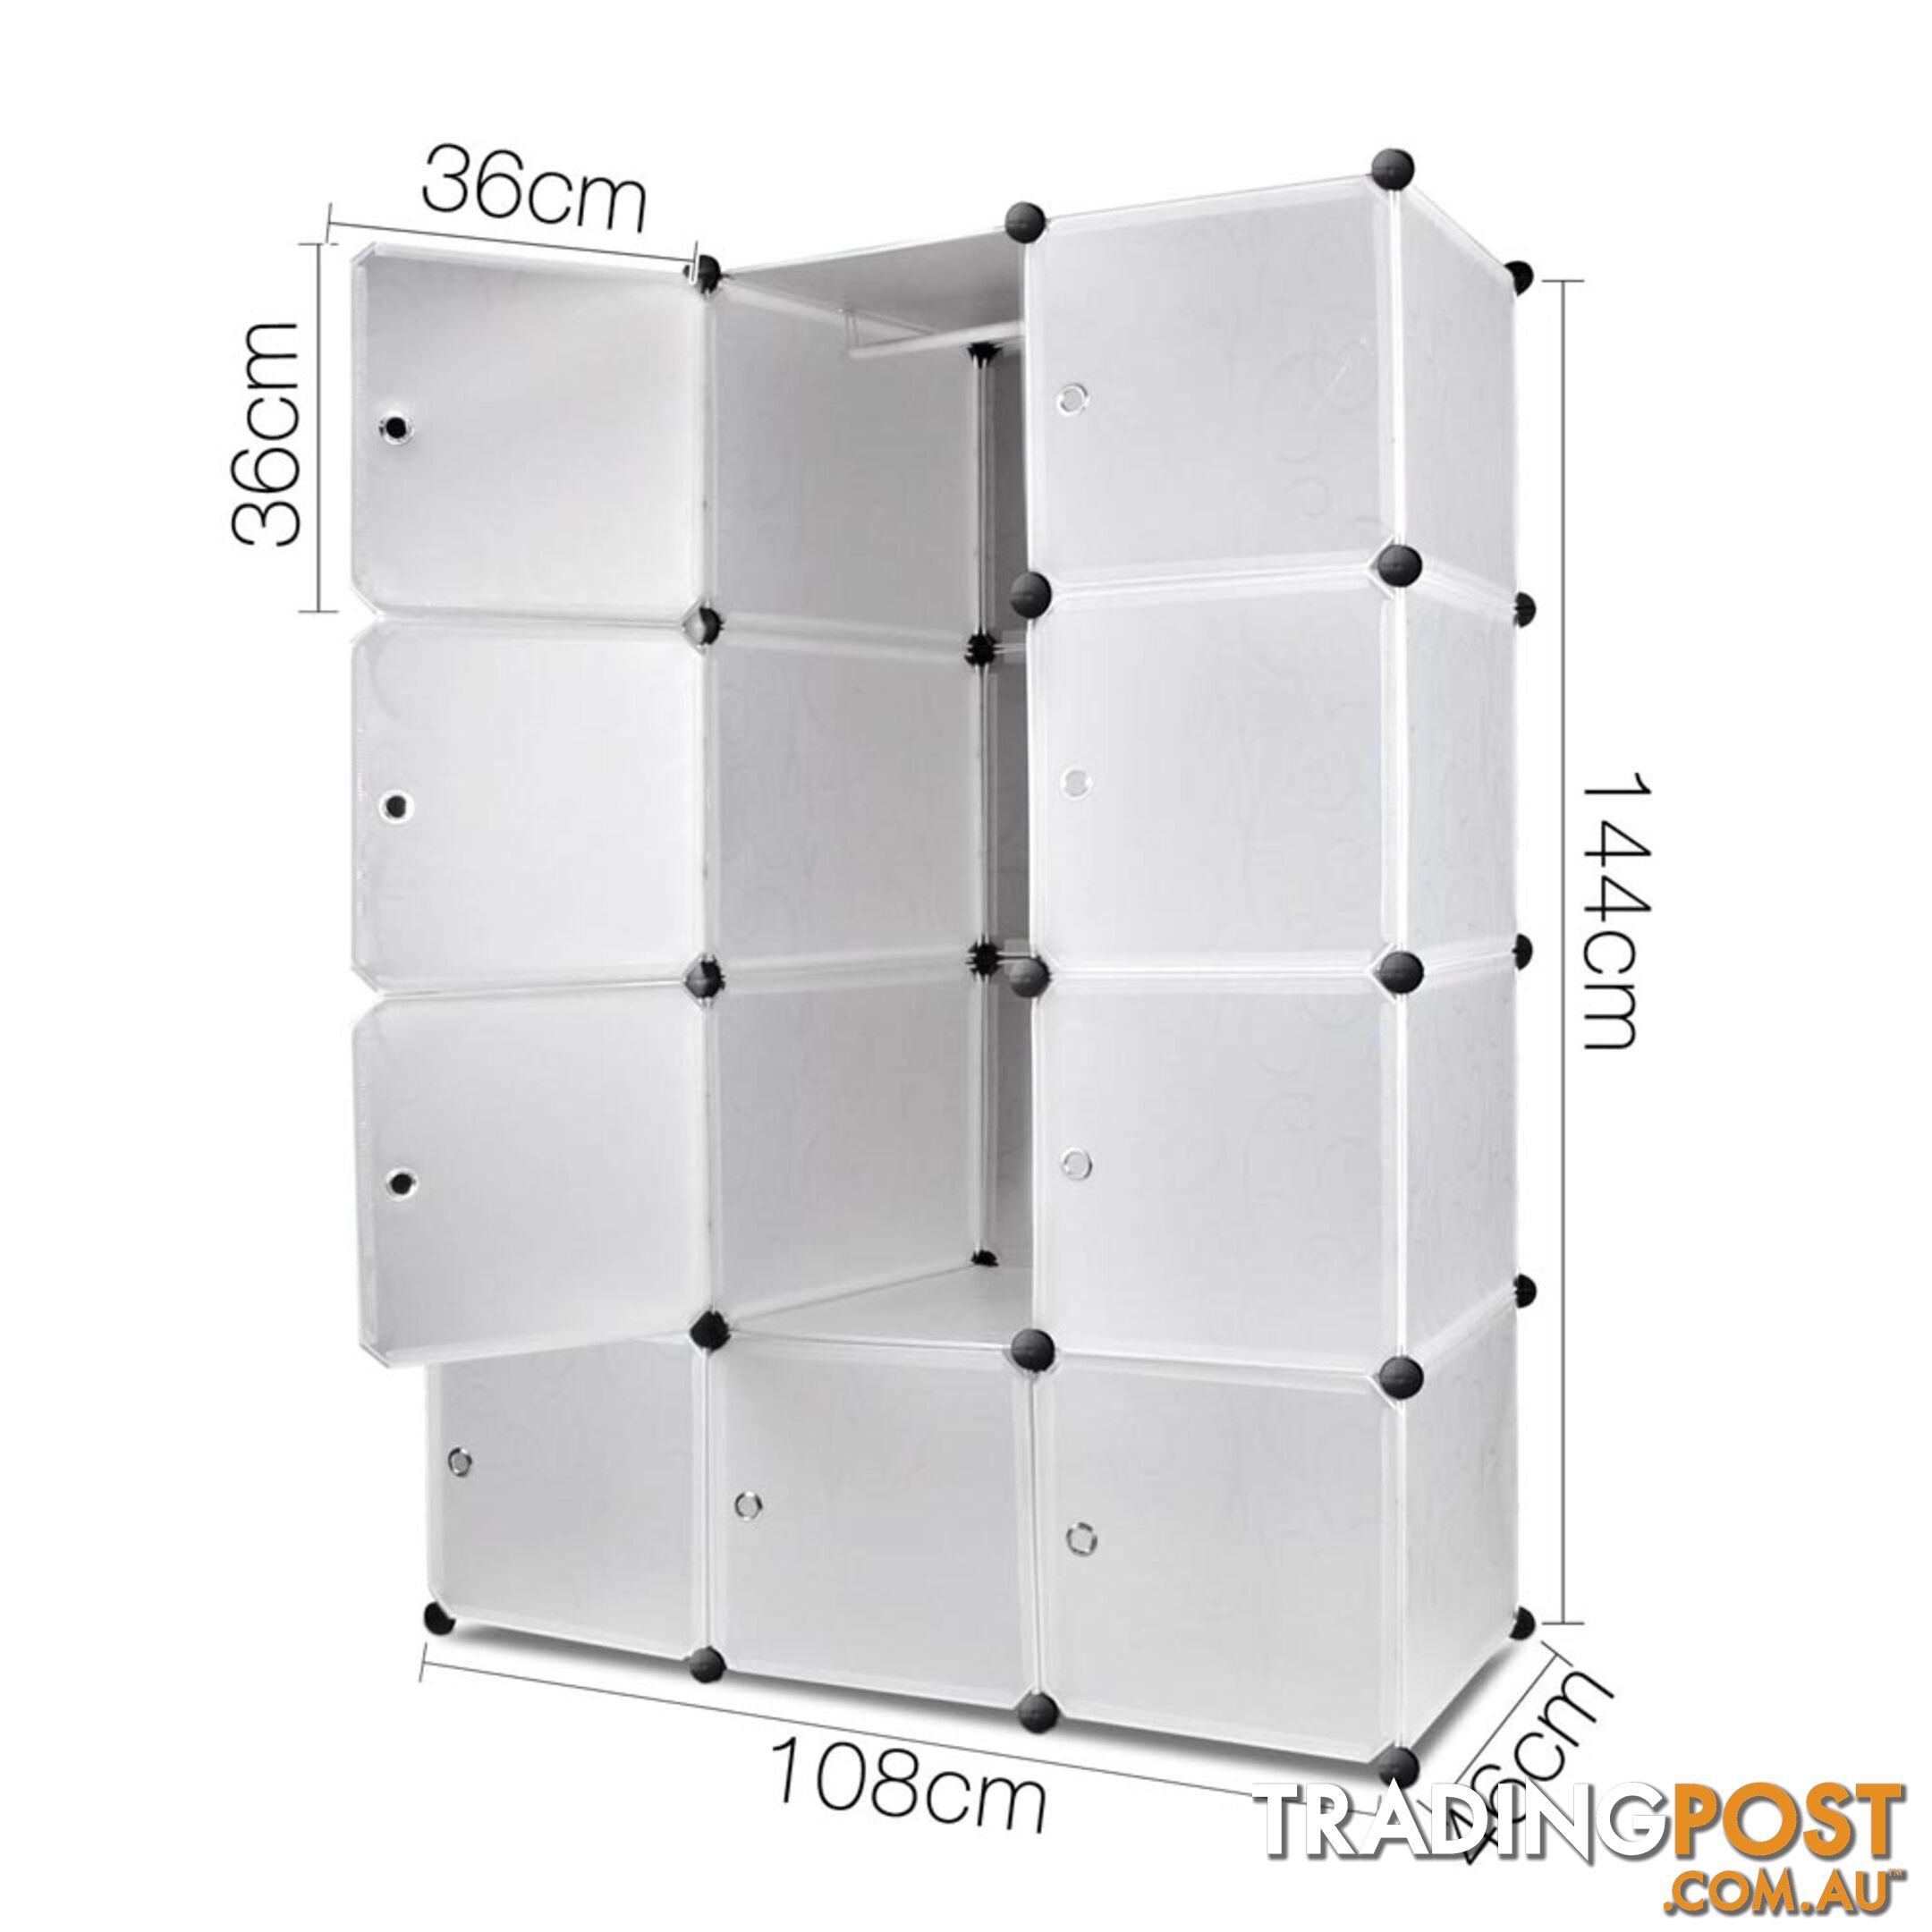 12 Cube Storage Cabinet with Hanging Bar - White